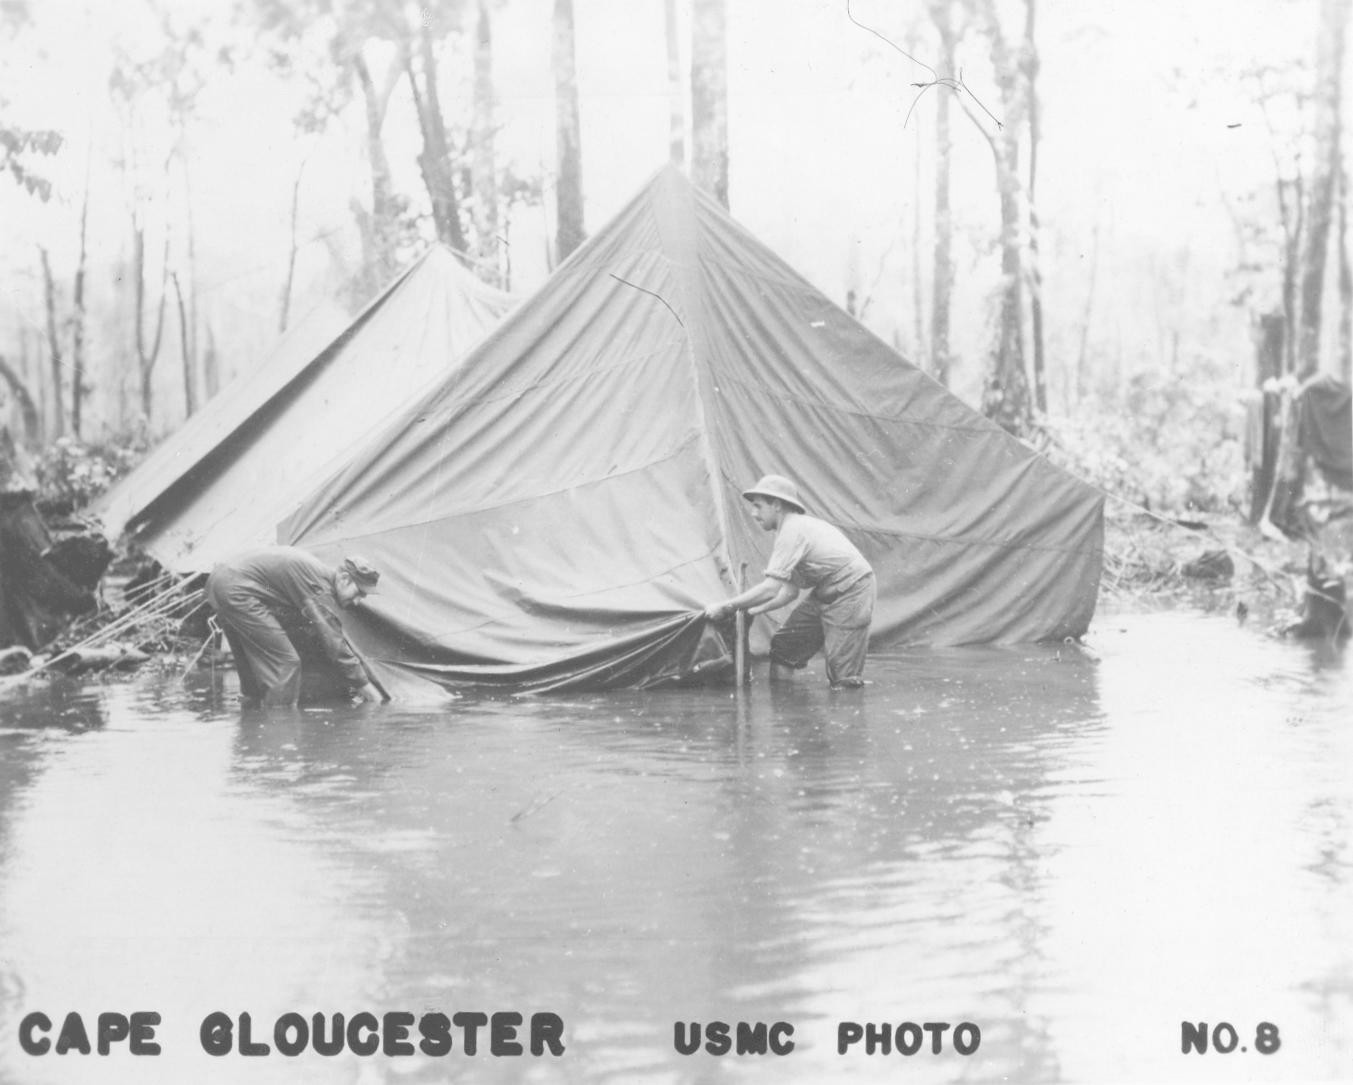 Flooded US Marine camp site, Cape Gloucester, New Britain, 1944